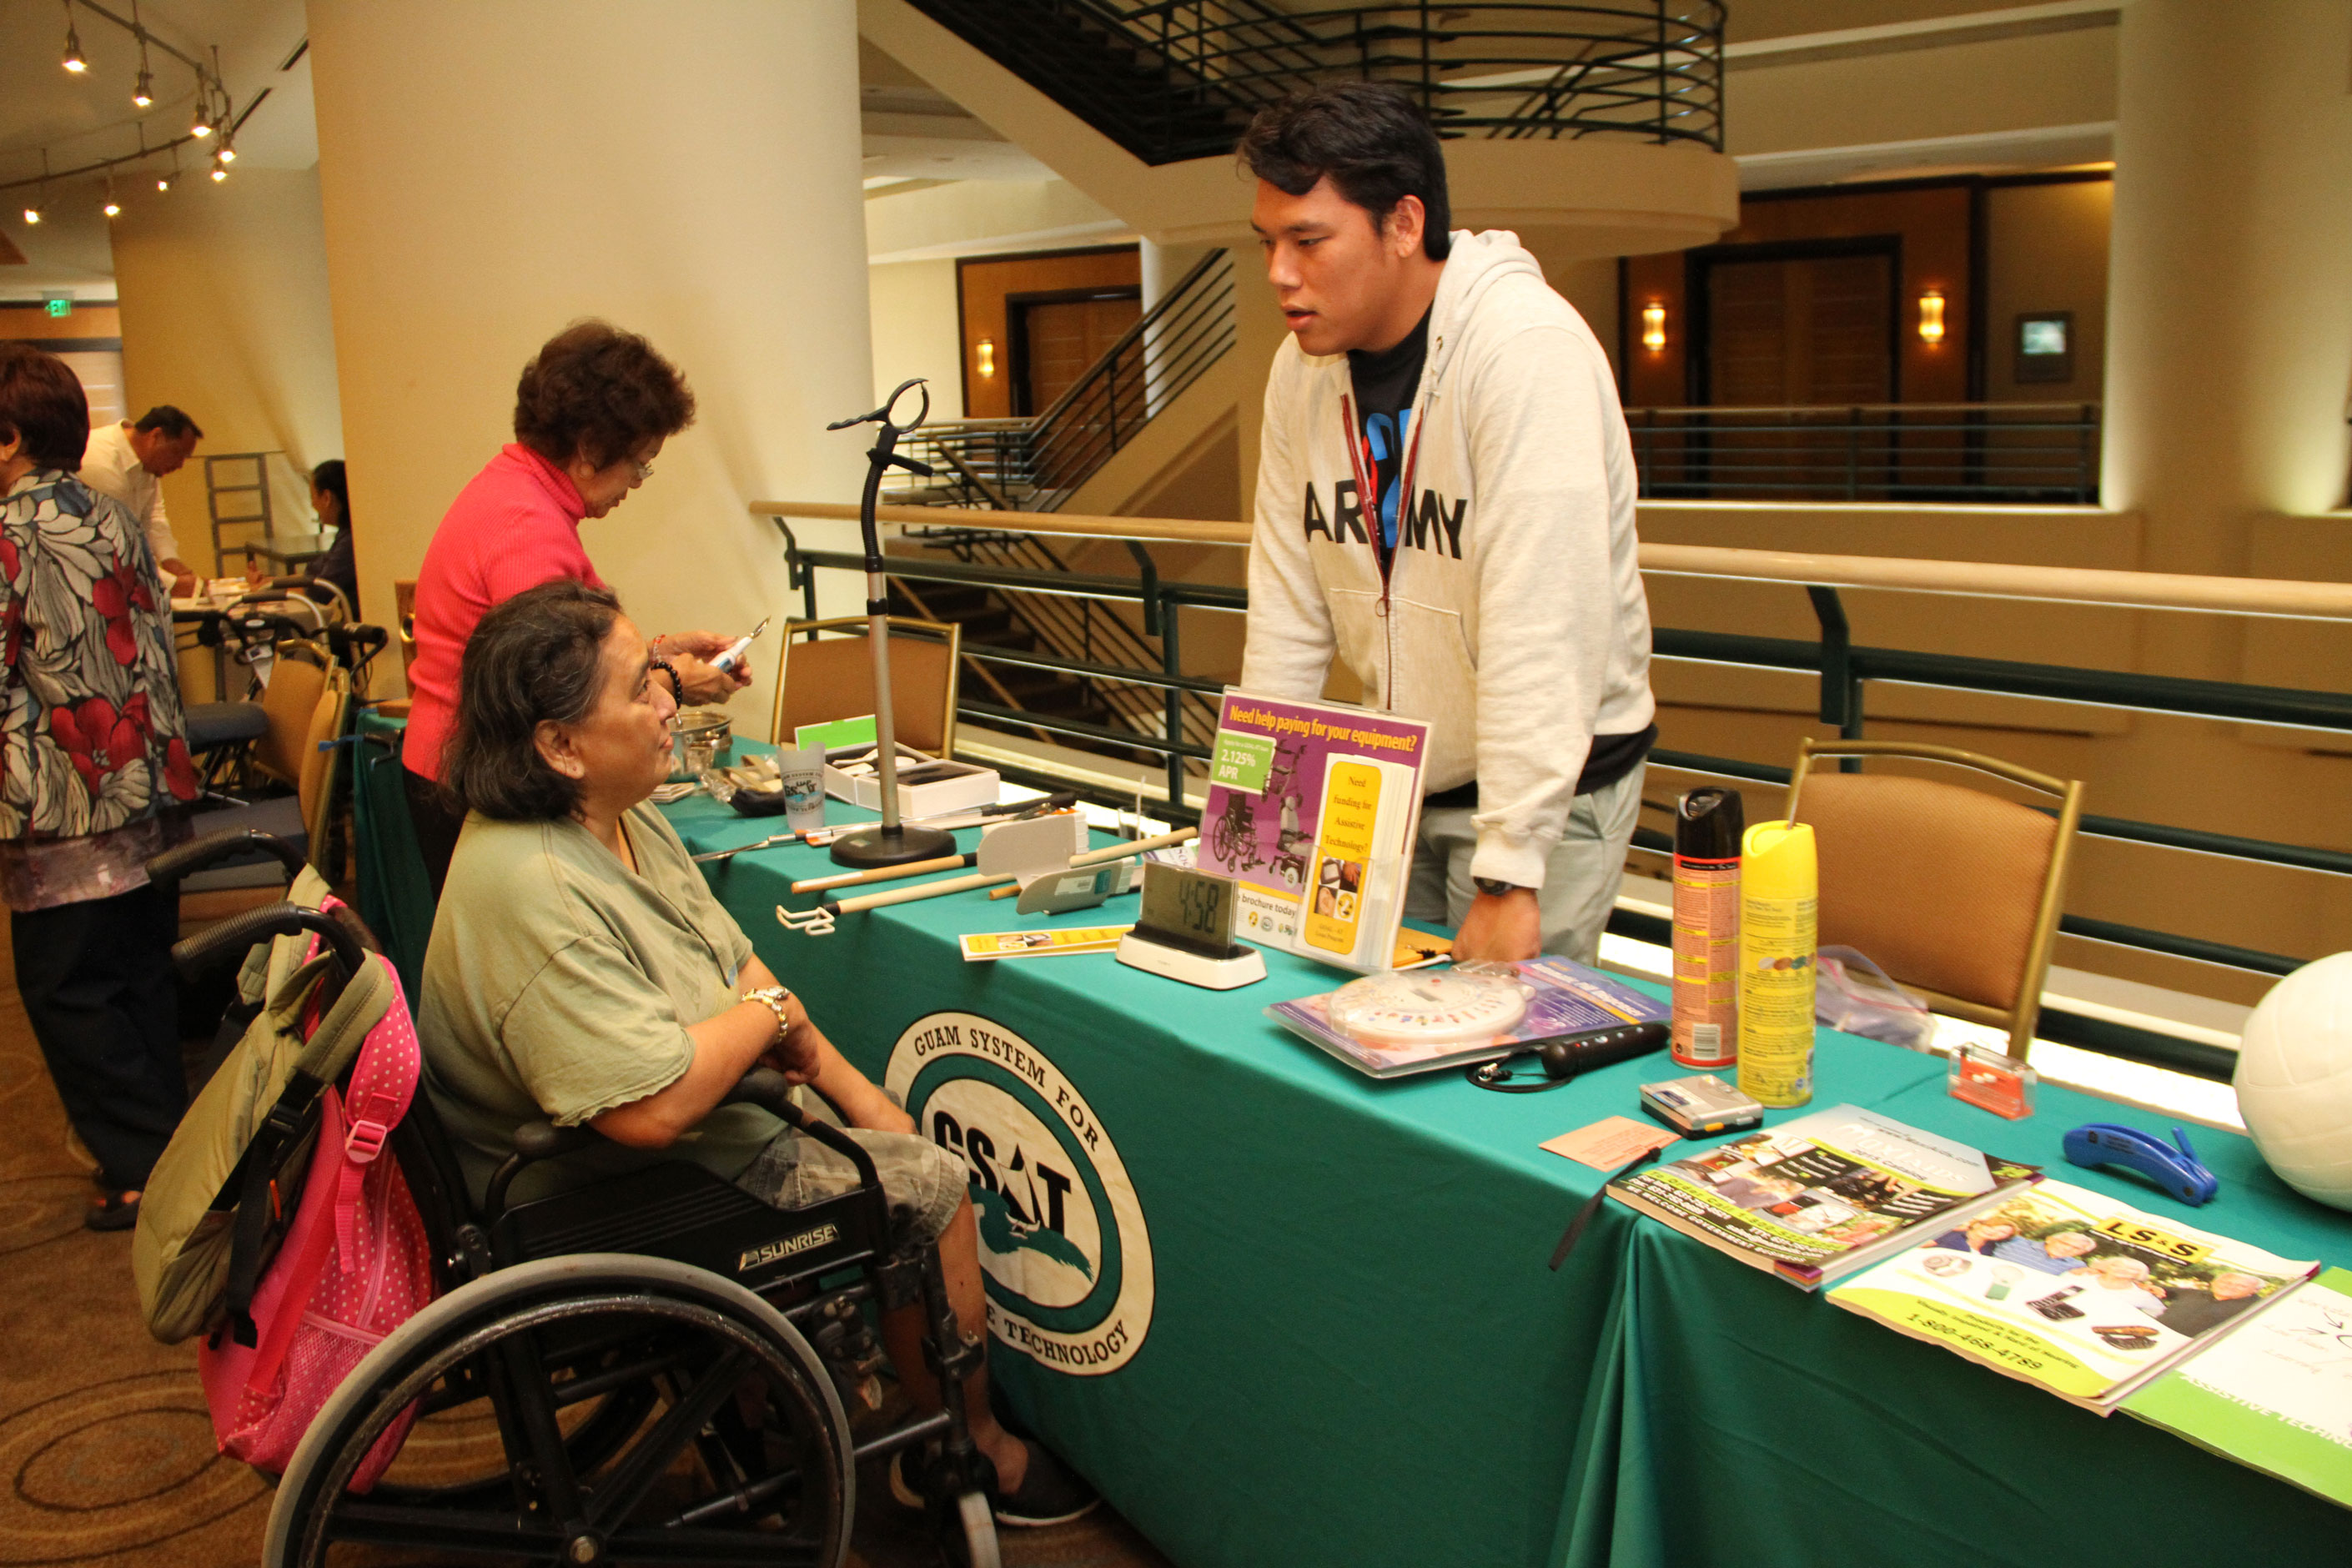 Individual in wheelchair speaking with individual standing behind table with various assistive technology devices.